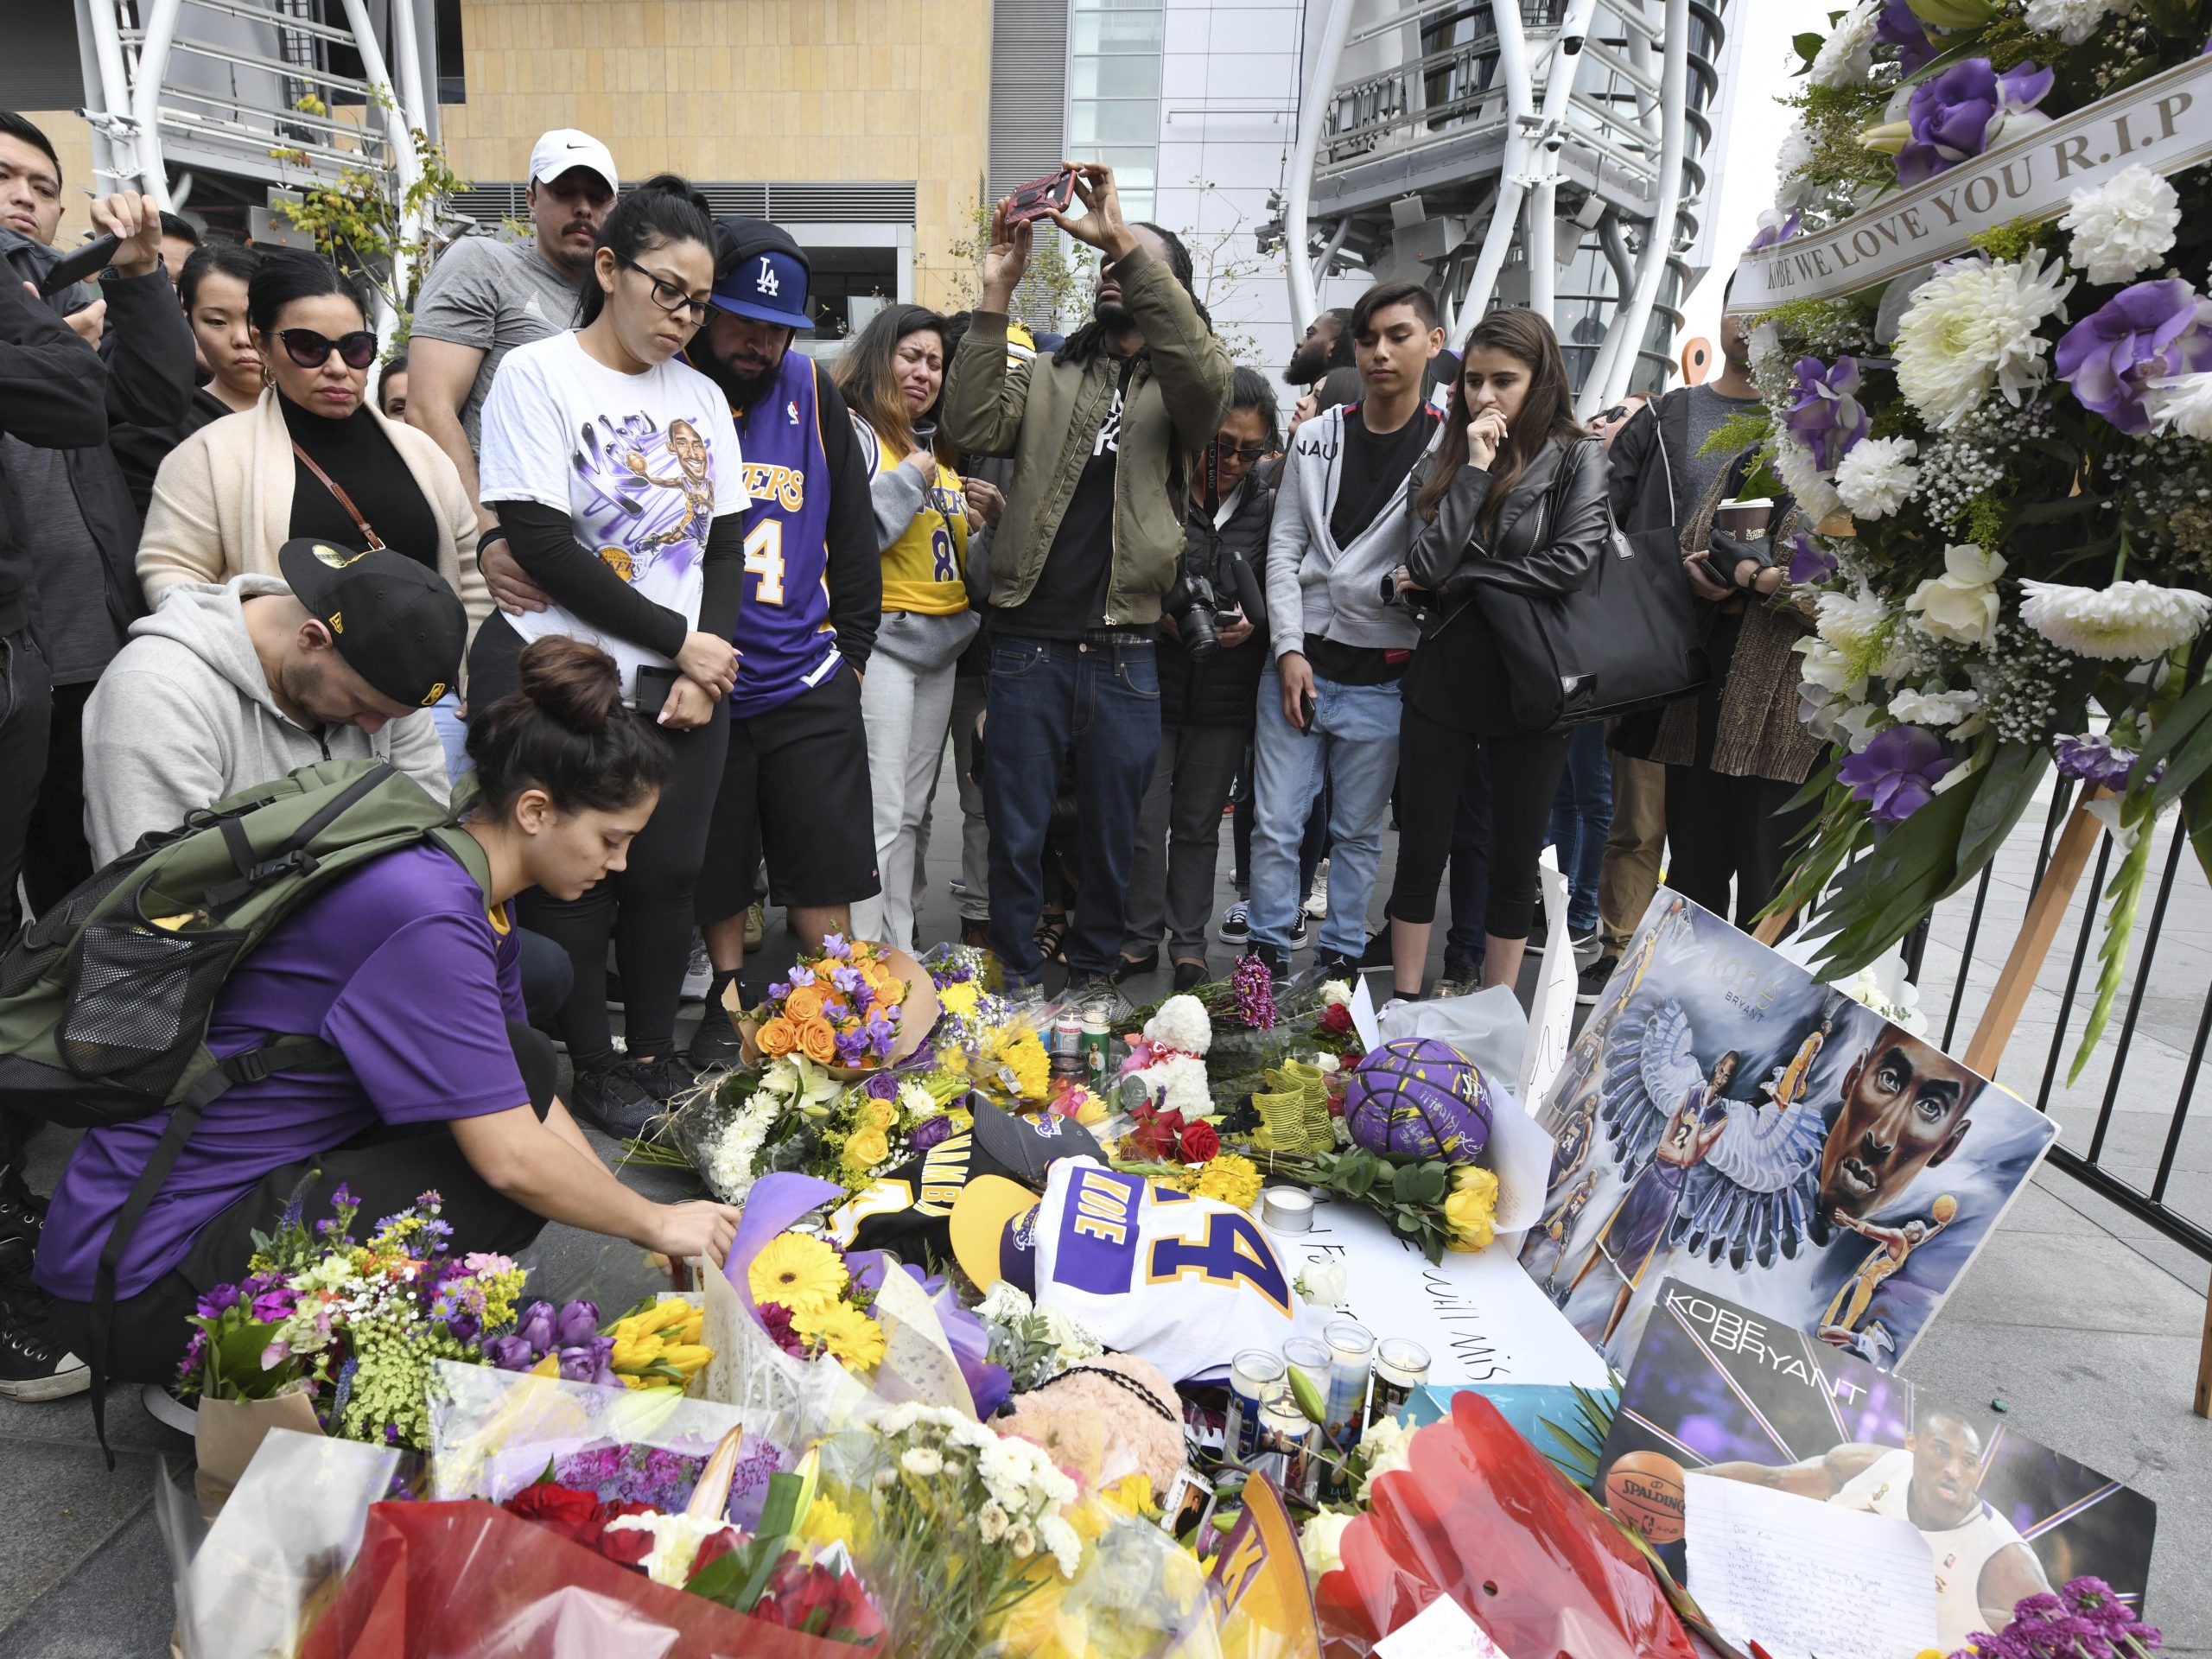 Valerie Samano, left, places flowers at a memorial near the Staples Center in Los Angeles, after the death of Laker legend Kobe Bryant on Sunday.